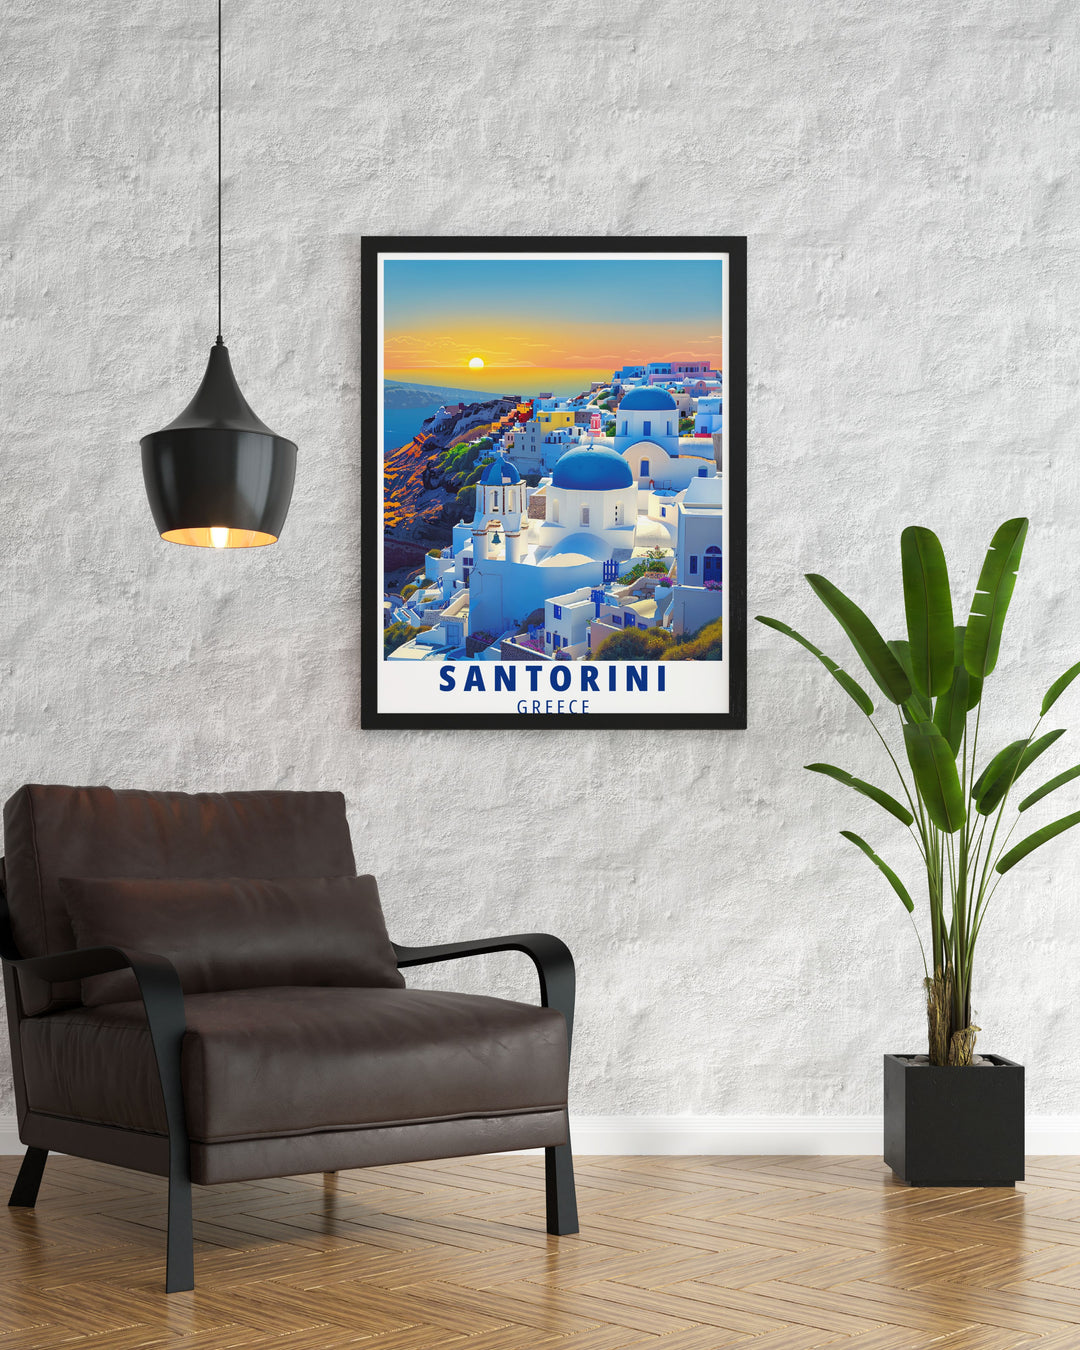 Elegant travel poster featuring the enchanting town of Oia in Santorini. Ideal for enhancing your home with the islands artistic vistas and rich cultural heritage.